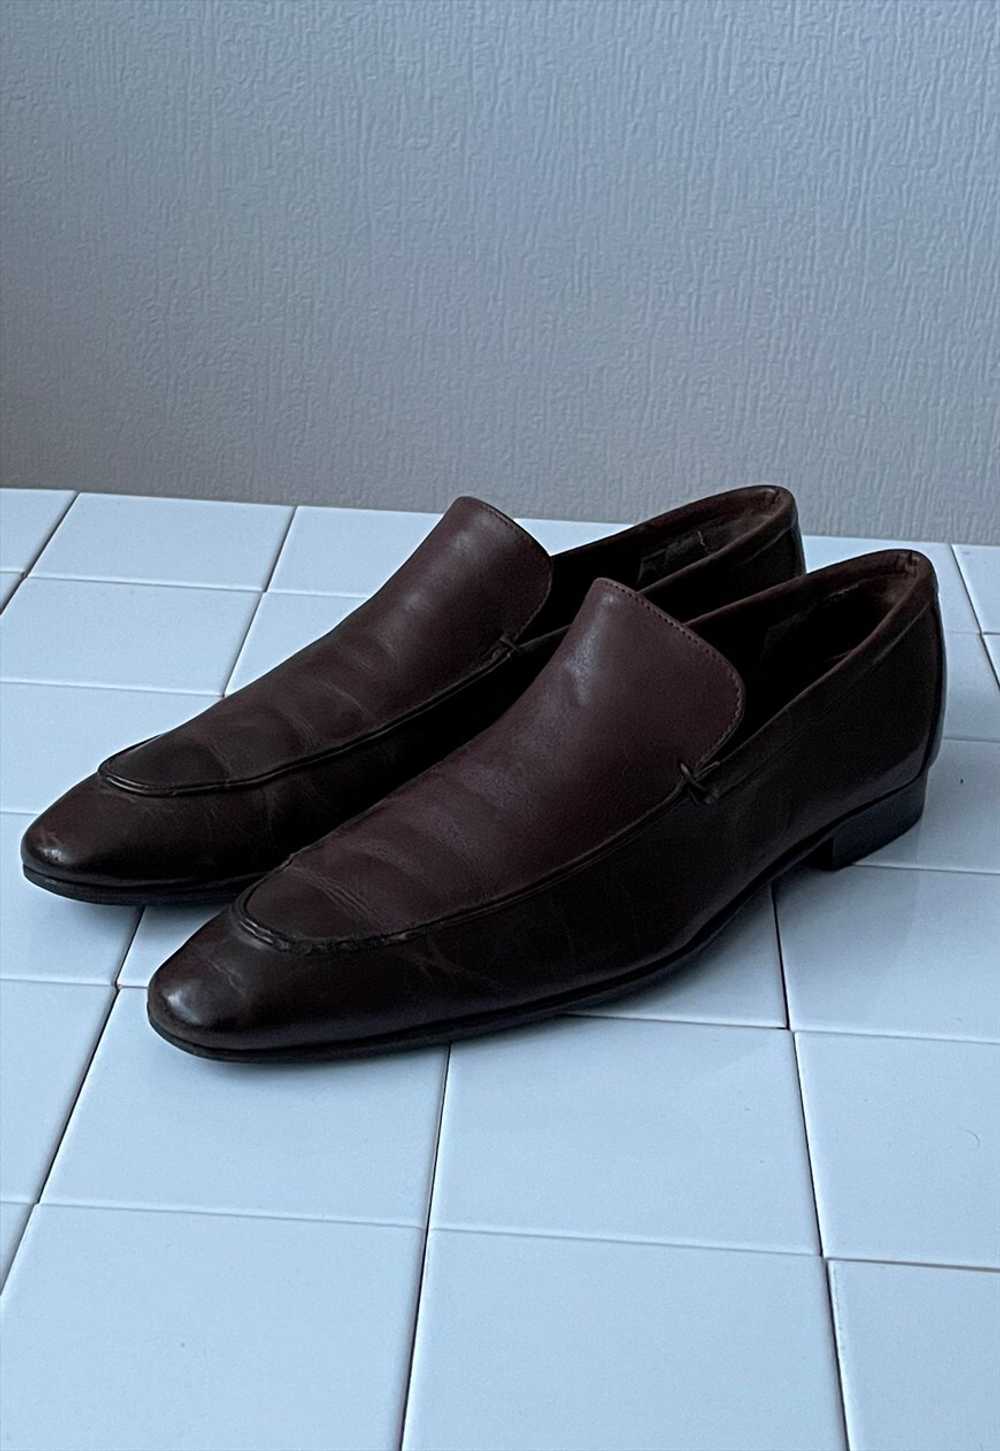 Vintage GUCCI Shoes Loafers Derby 90s Tom Ford Era - image 2